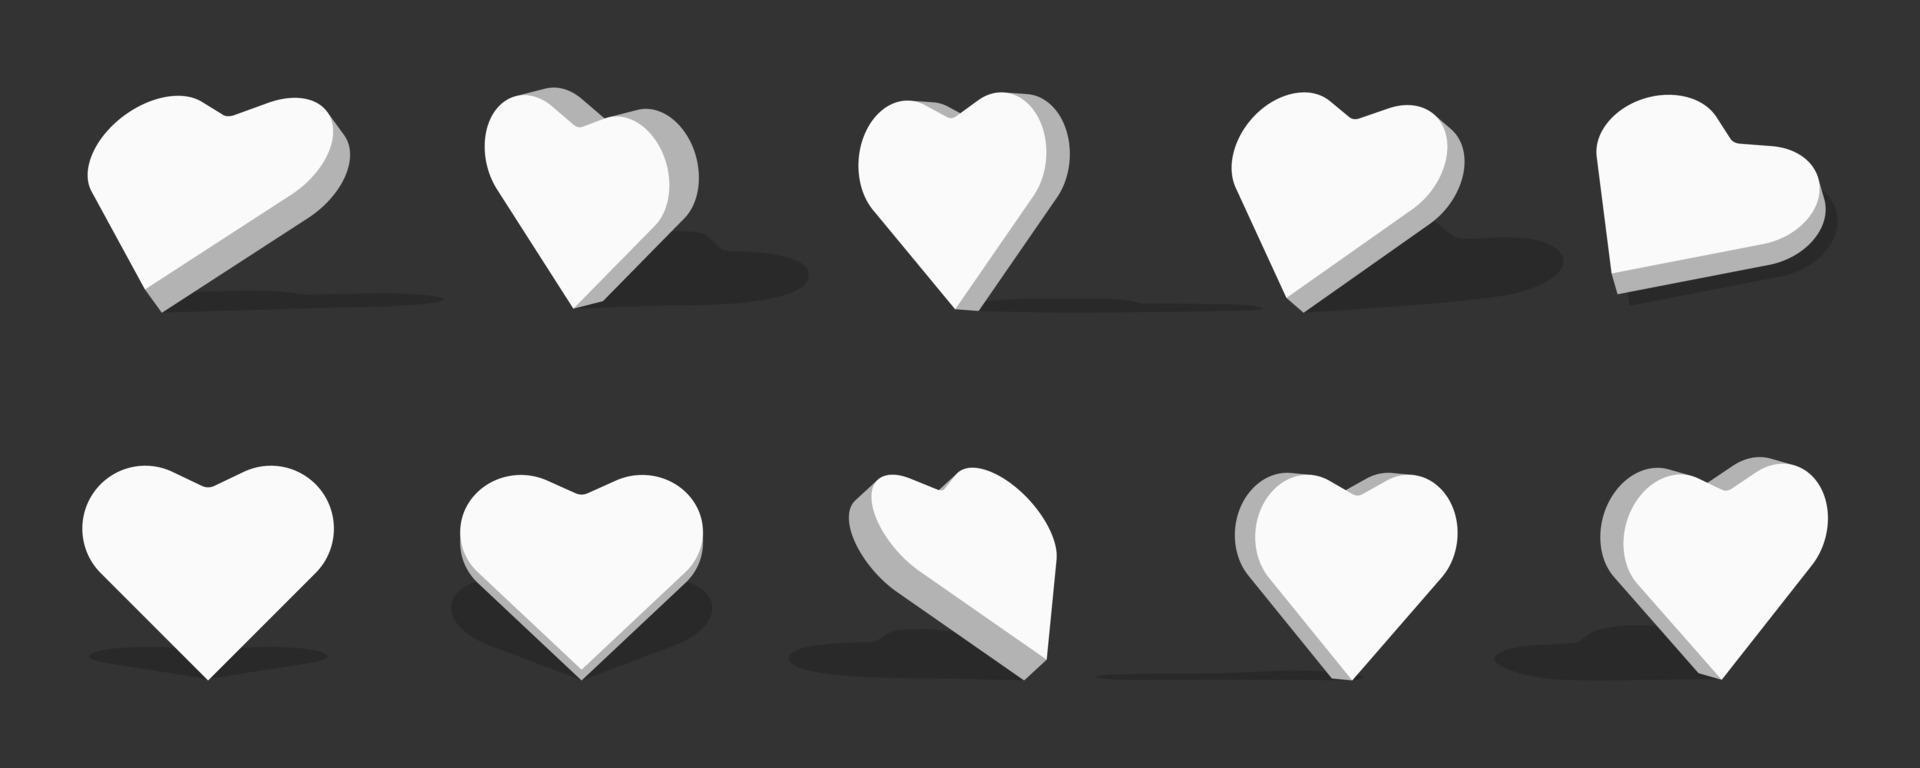 White heart 3d icon illustration with different views and angles vector